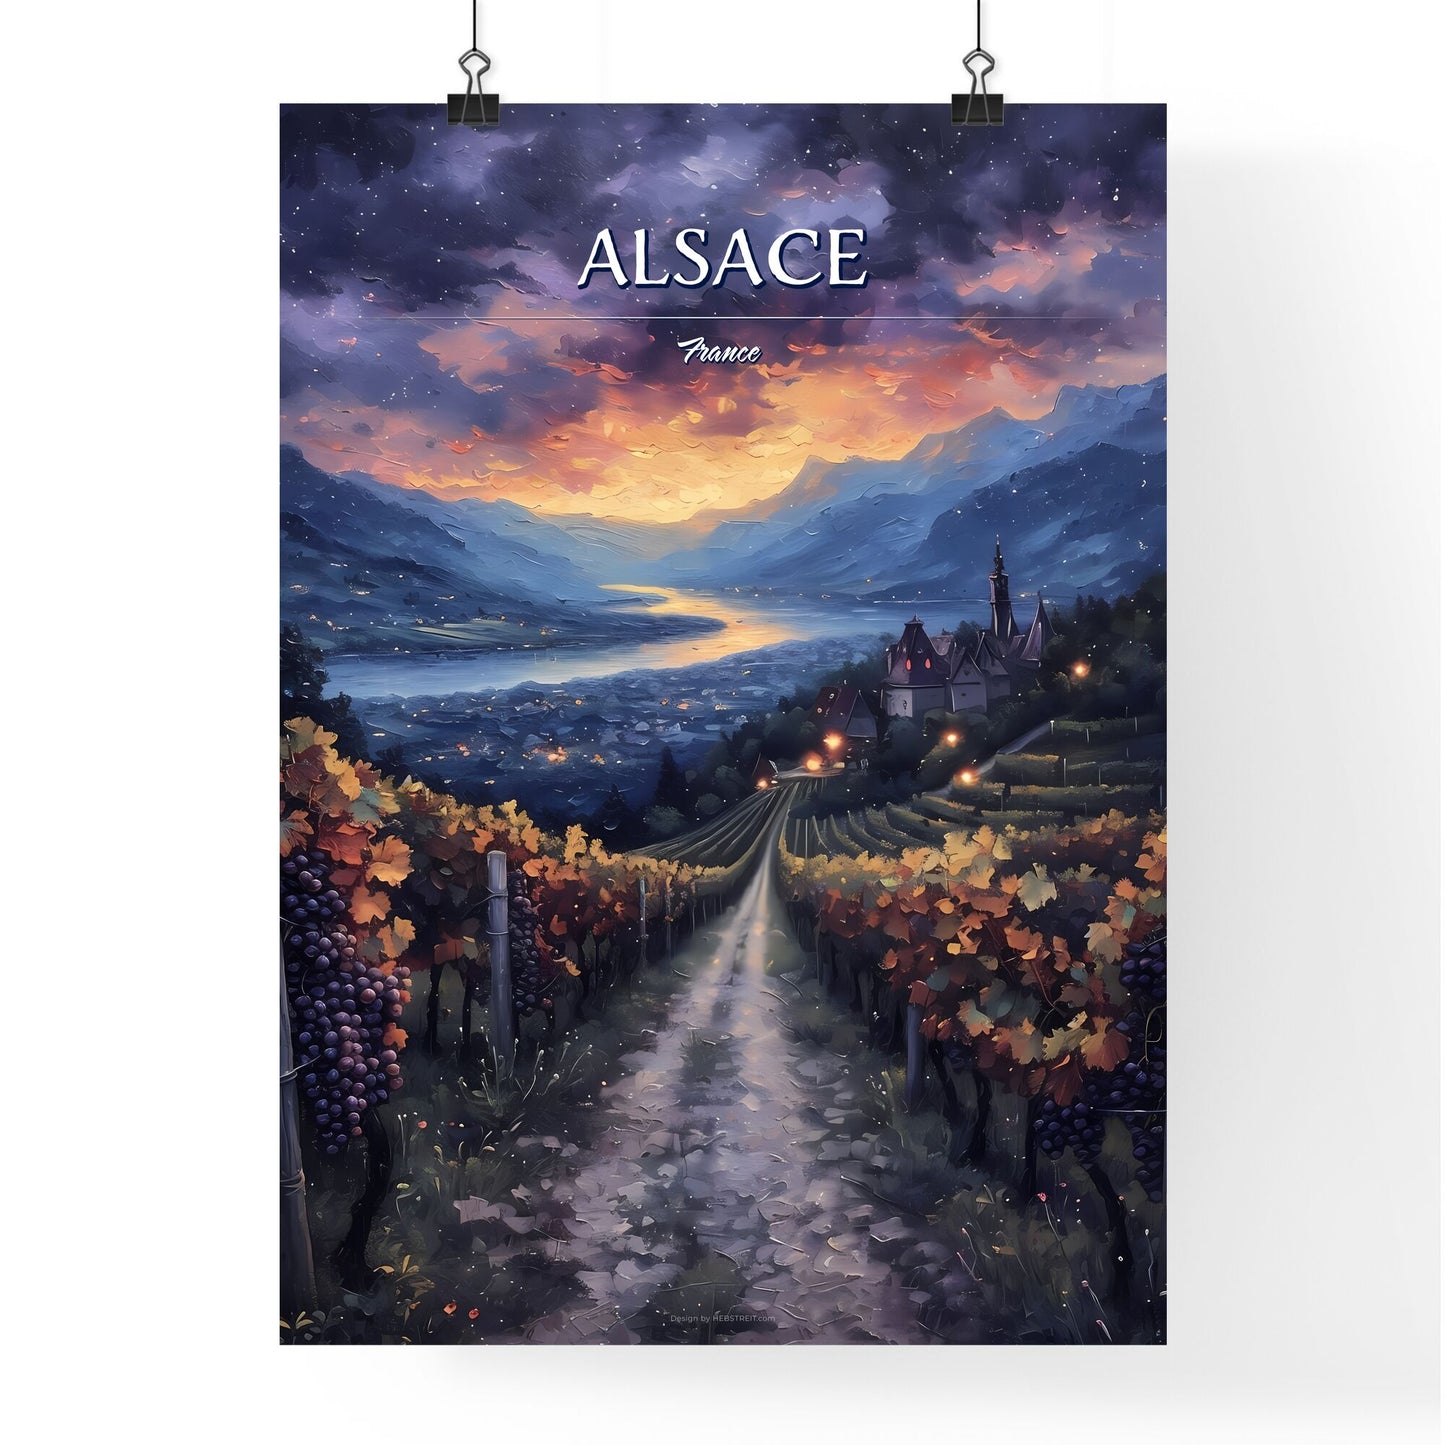 Alsace, France - Art print of a painting of a vineyard with a town in the background Default Title